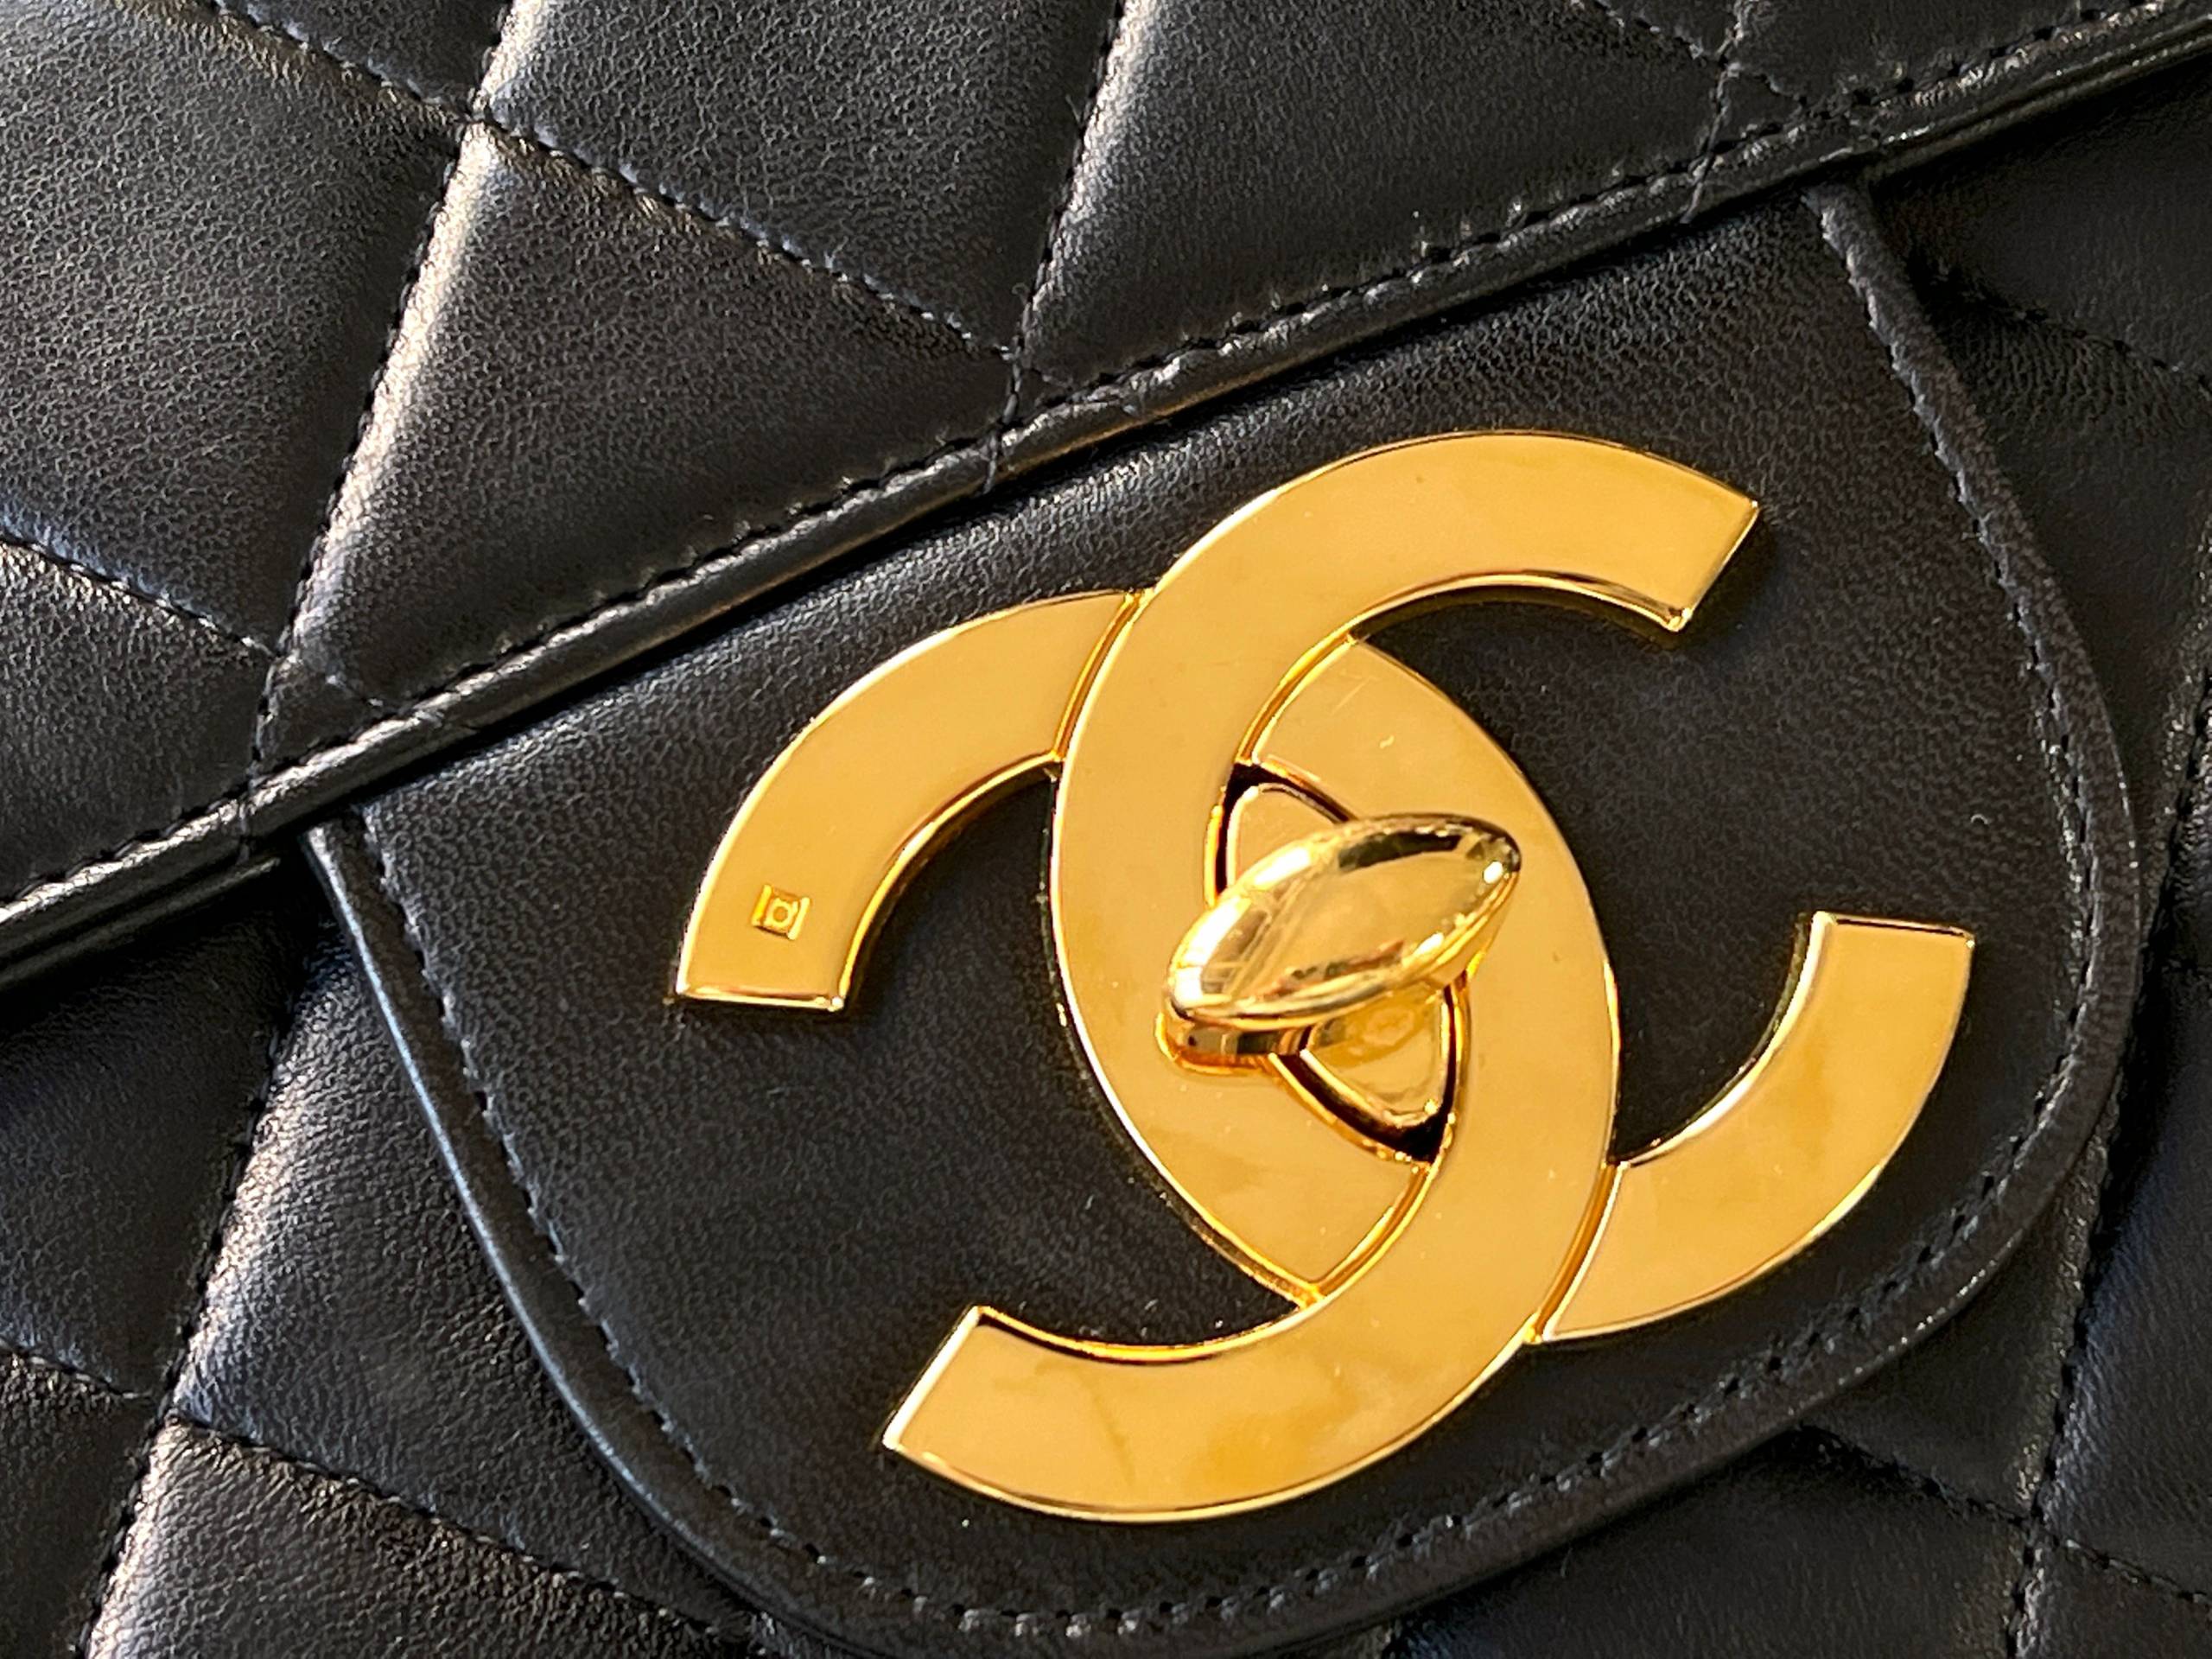 Everything You Should Know About Vintage Chanel Handbags: Q & A With  Boutique Patina - PurseBop